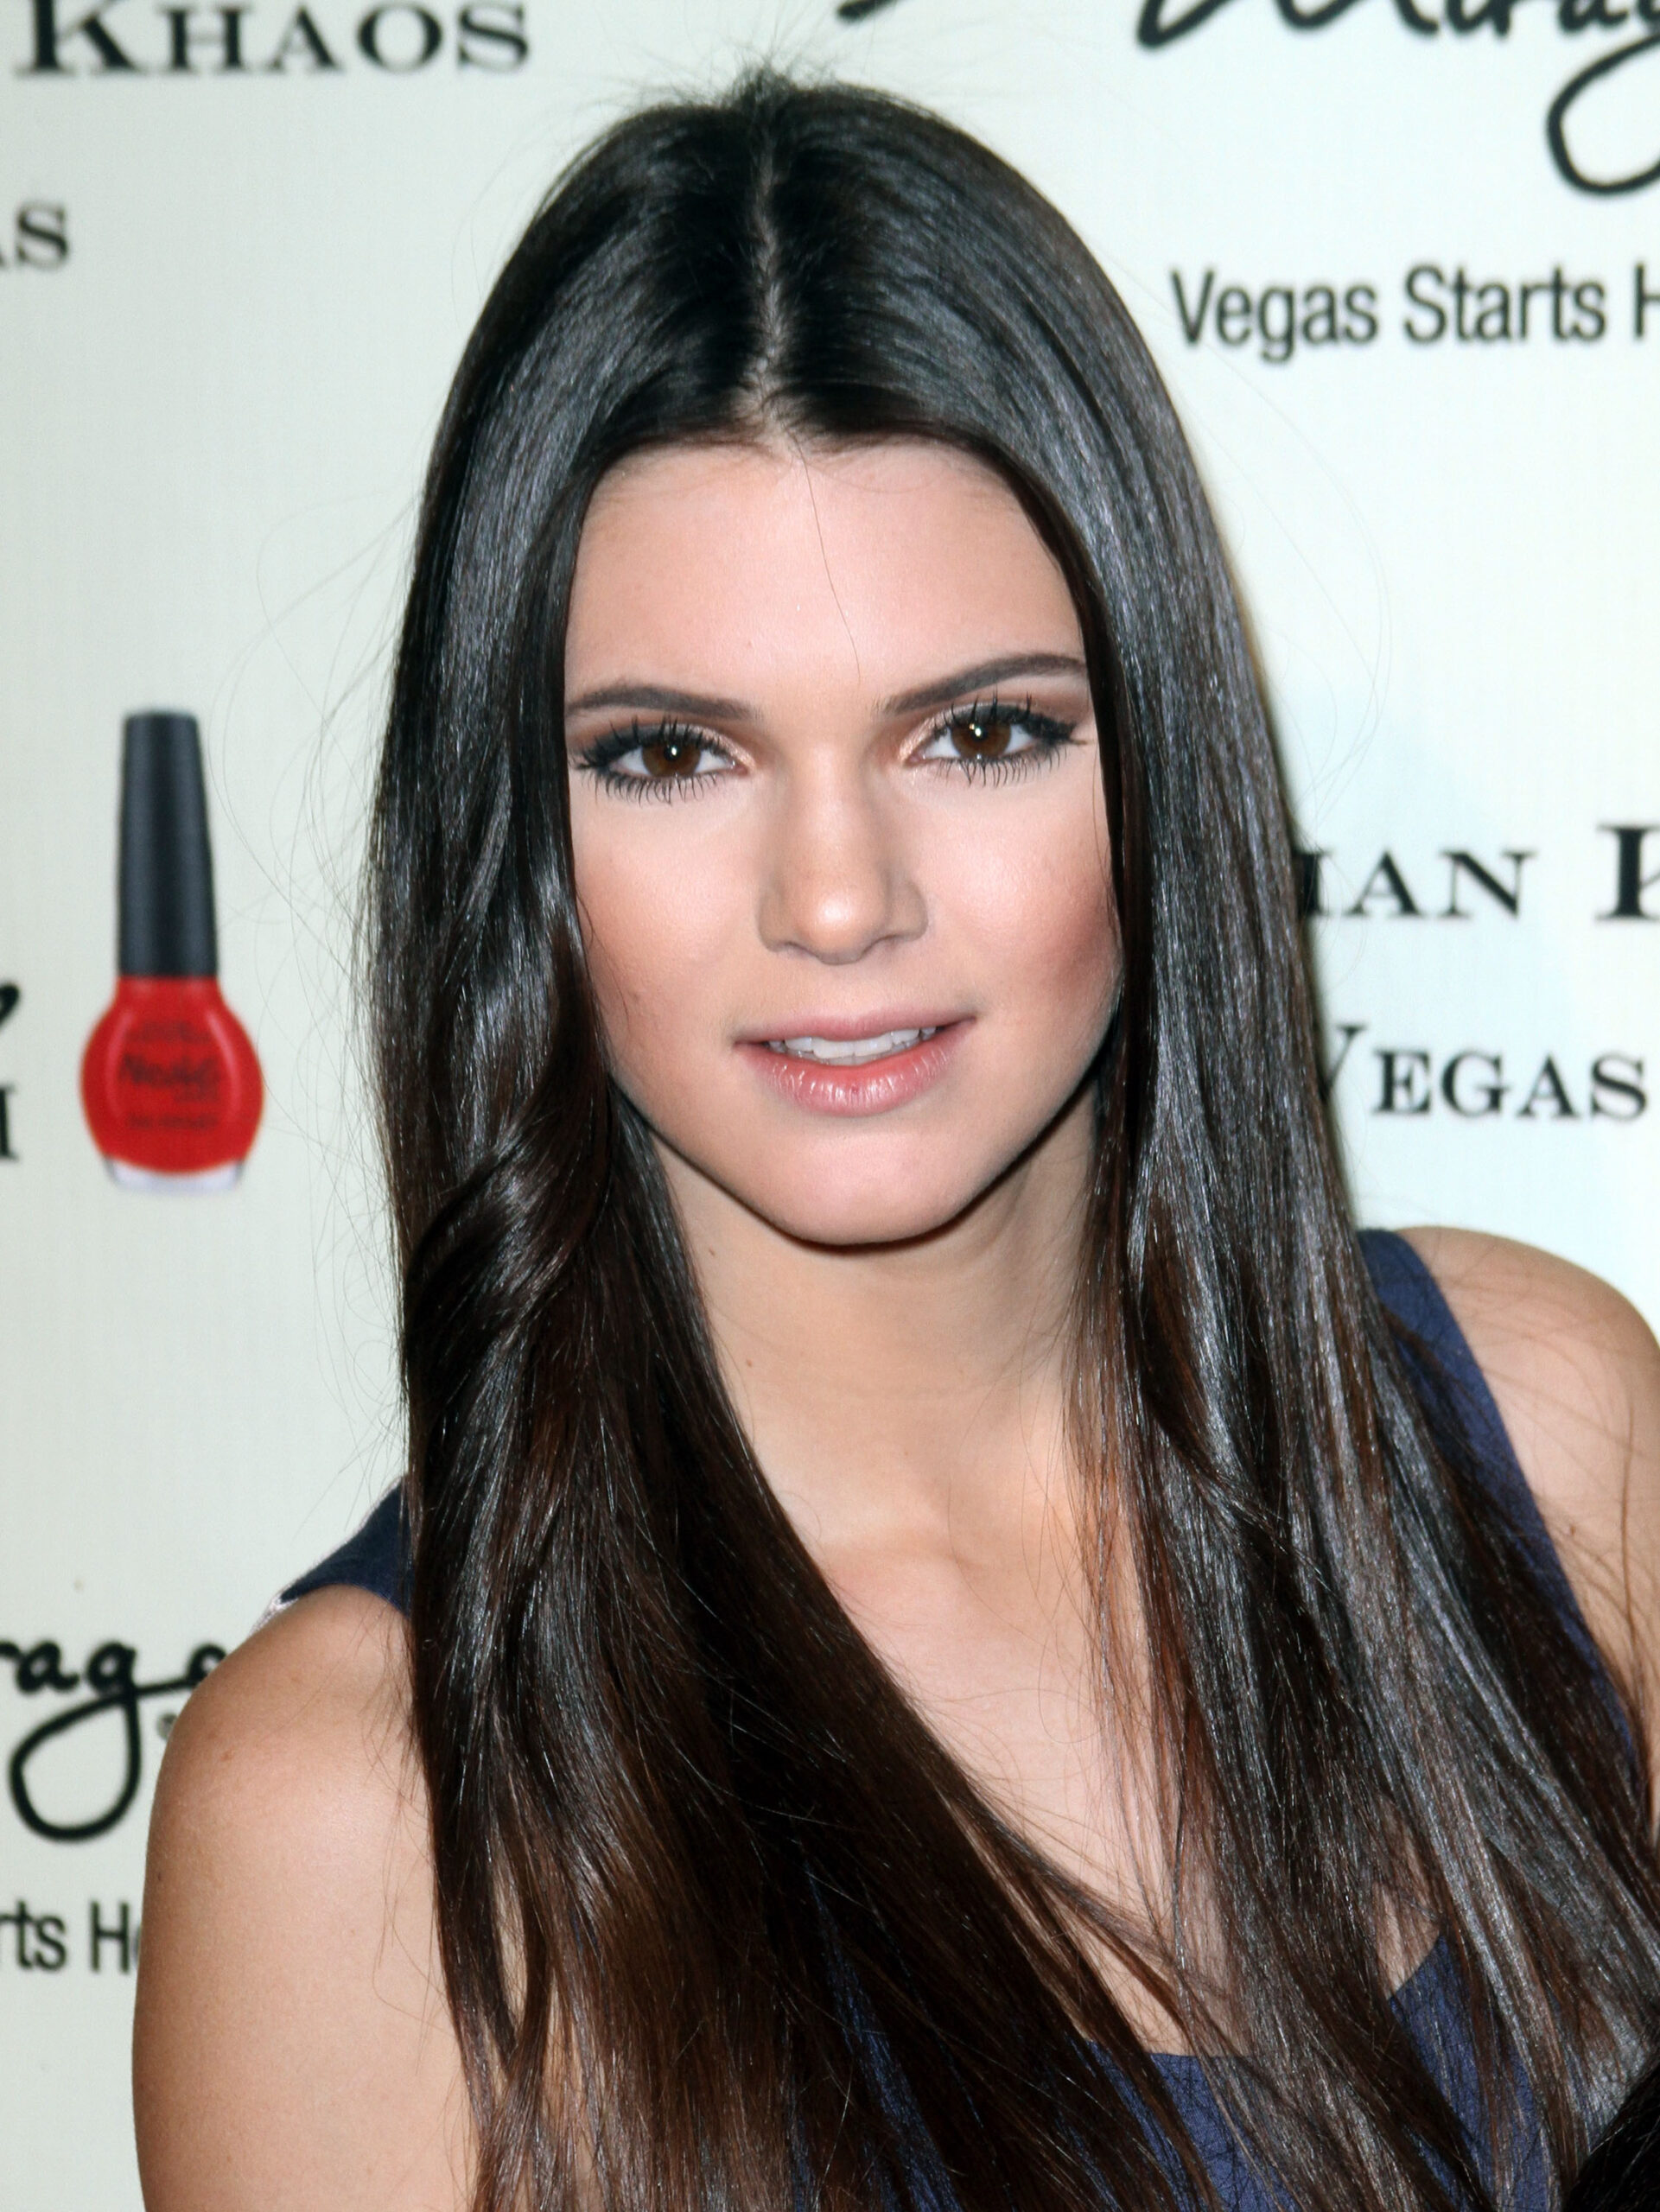 Kendall Jenner in 2011